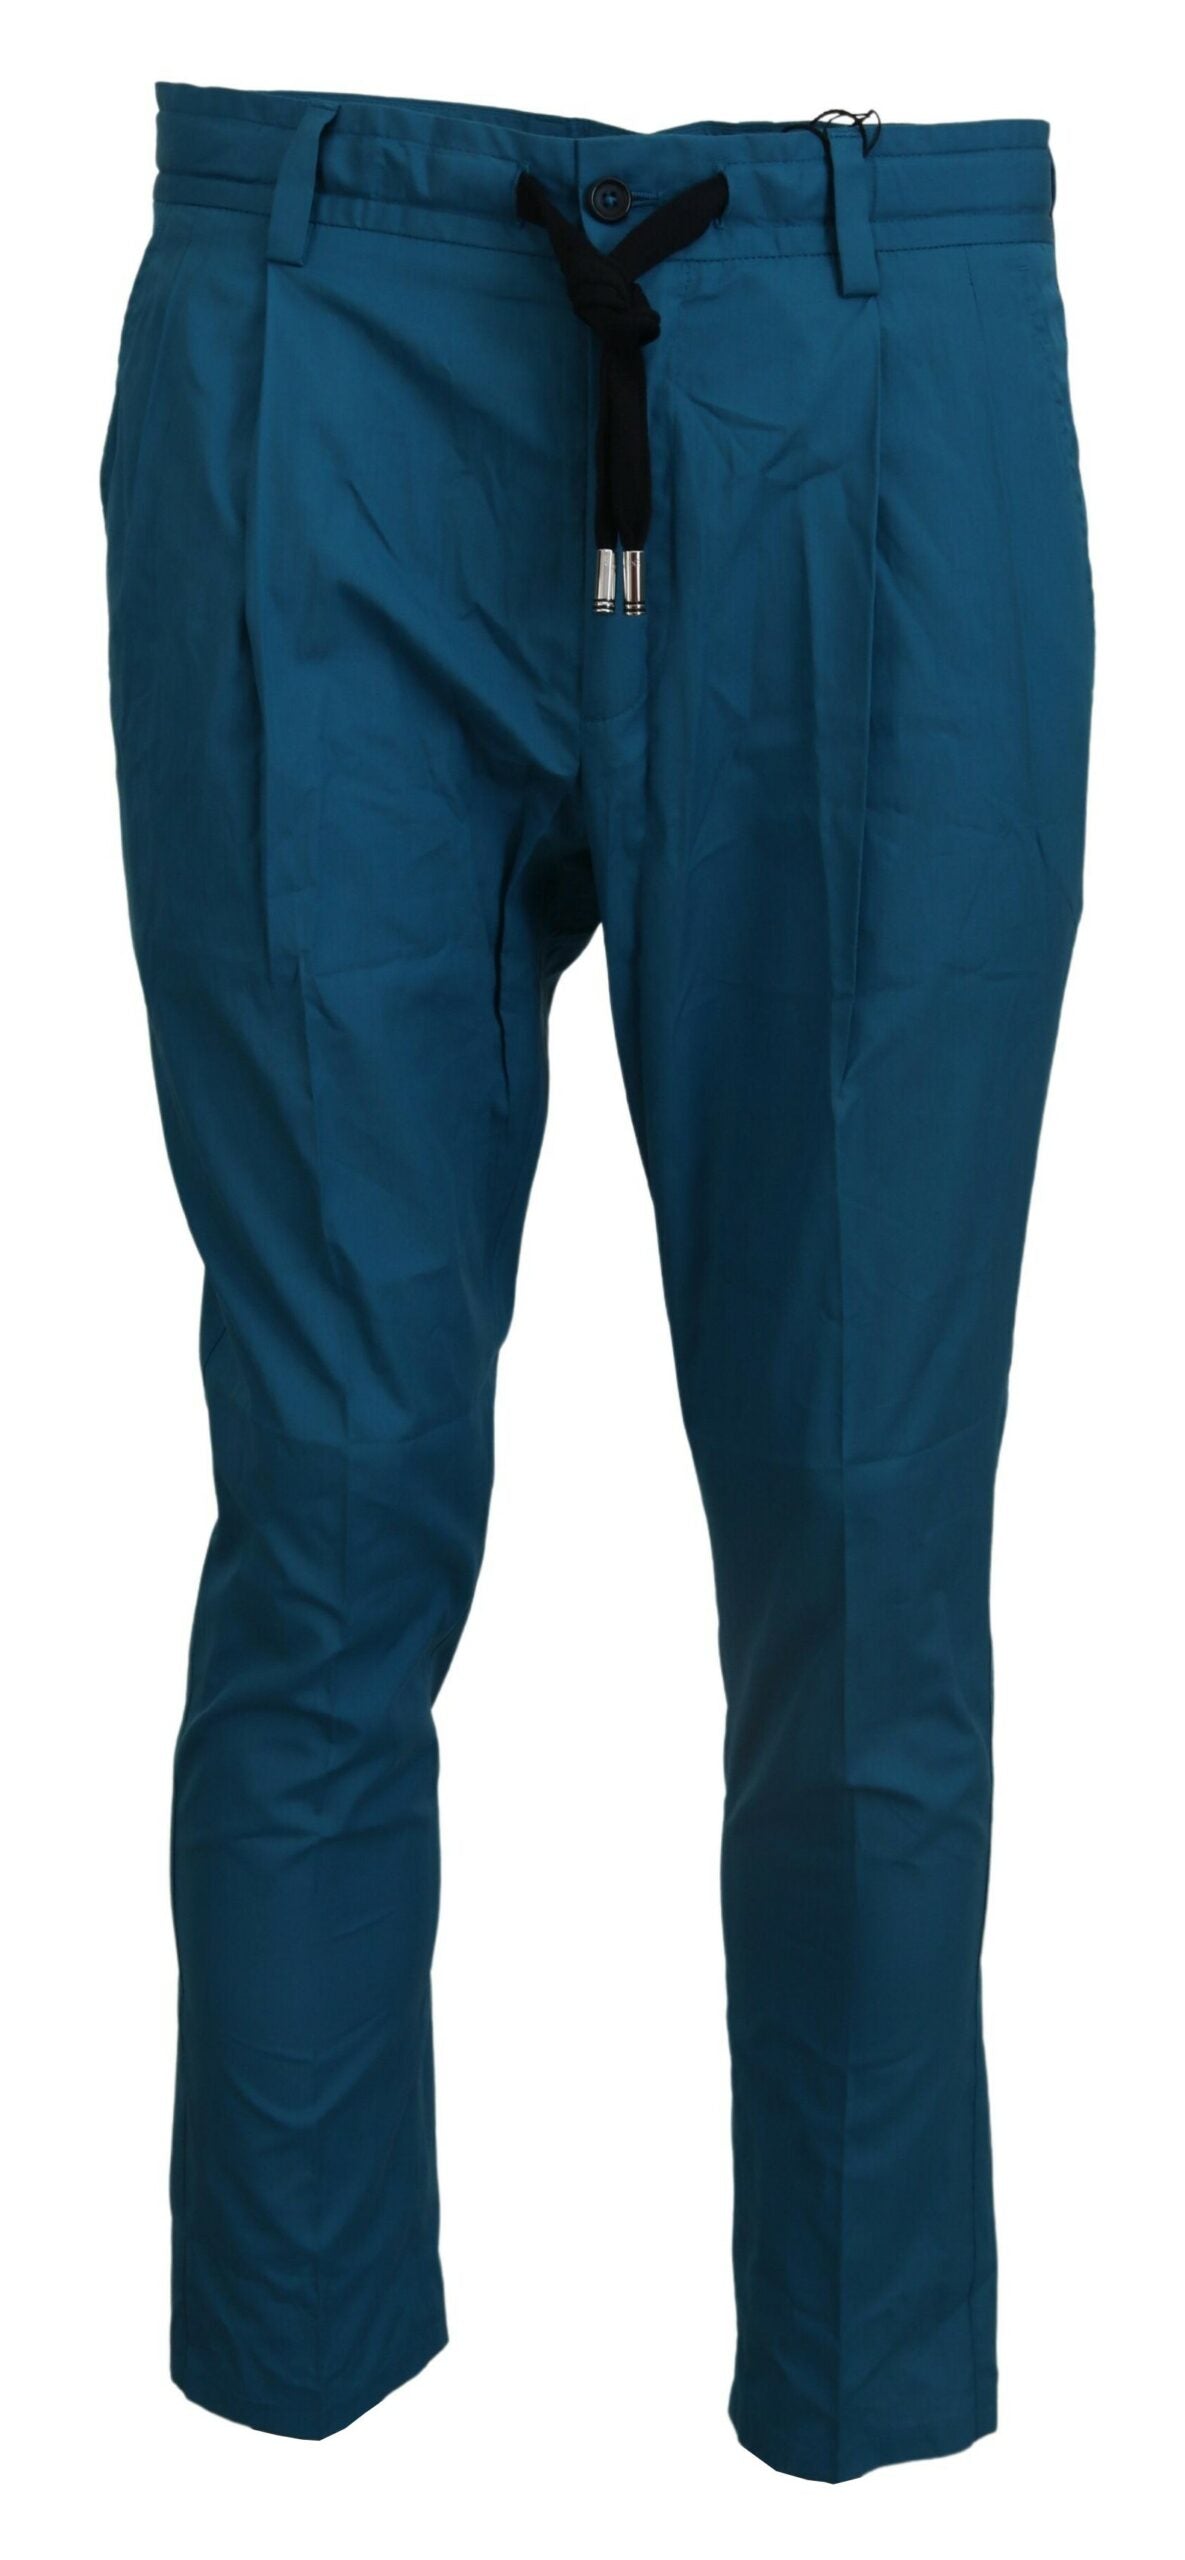 Dolce & Gabbana Casual Blue Chinos Trousers Pants